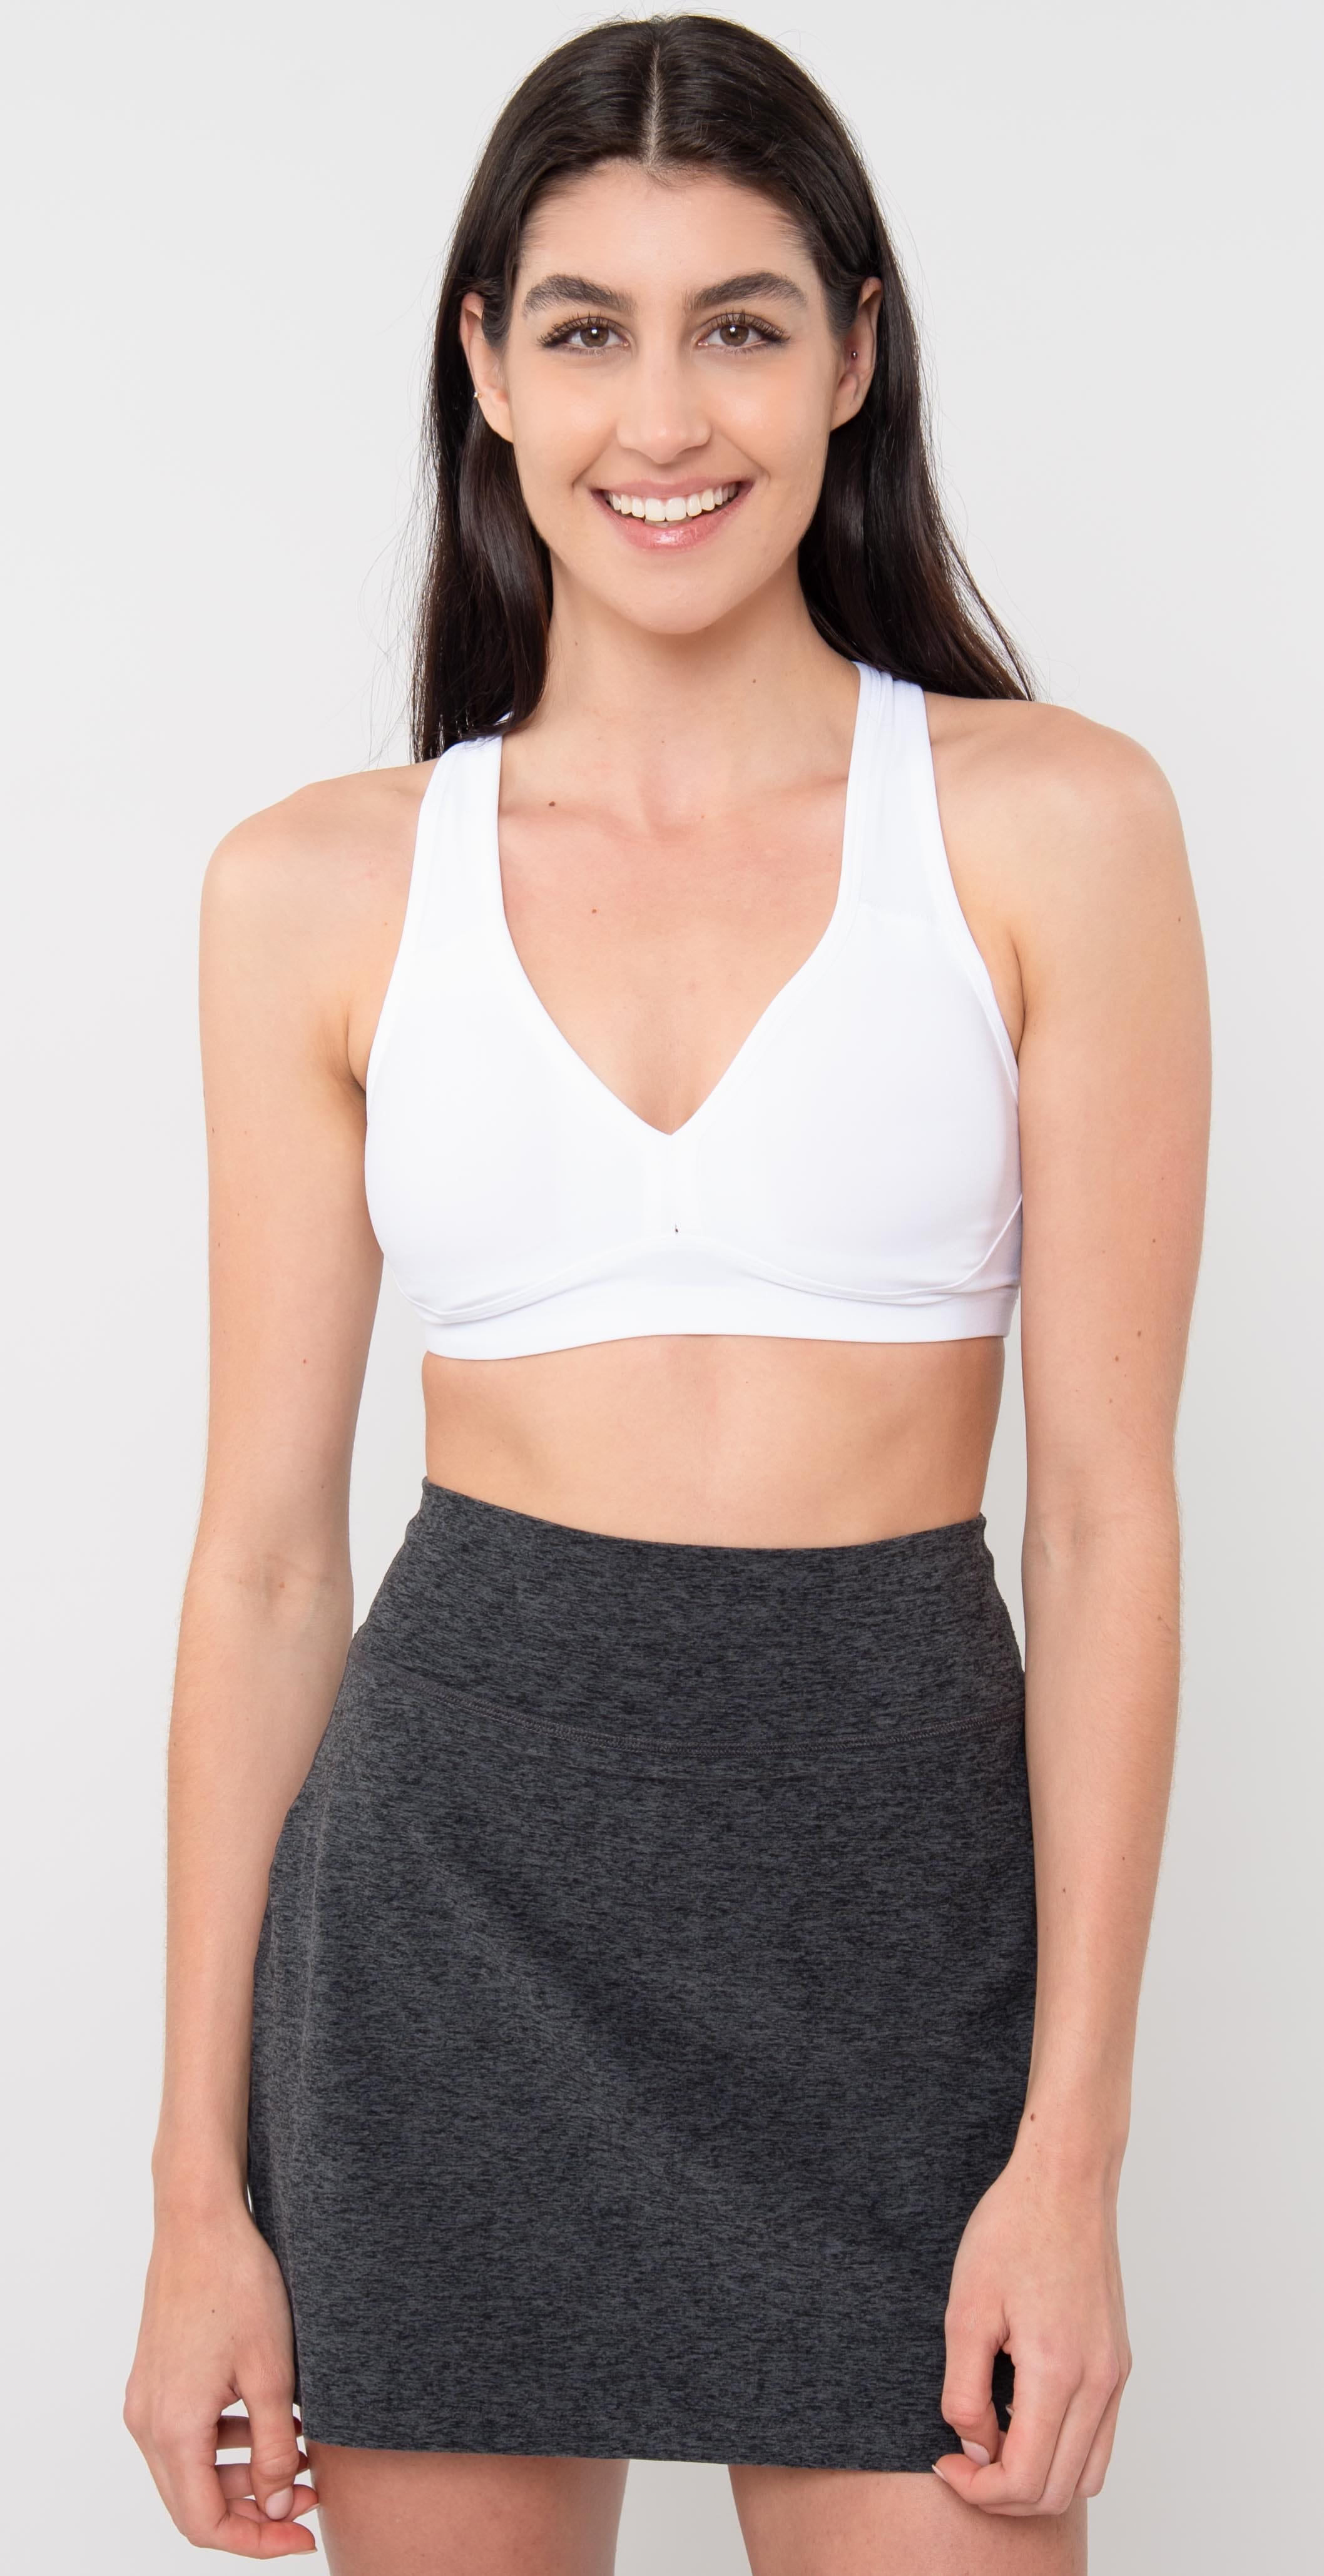 Best Deals for Lift And Separate Lululemon Bra